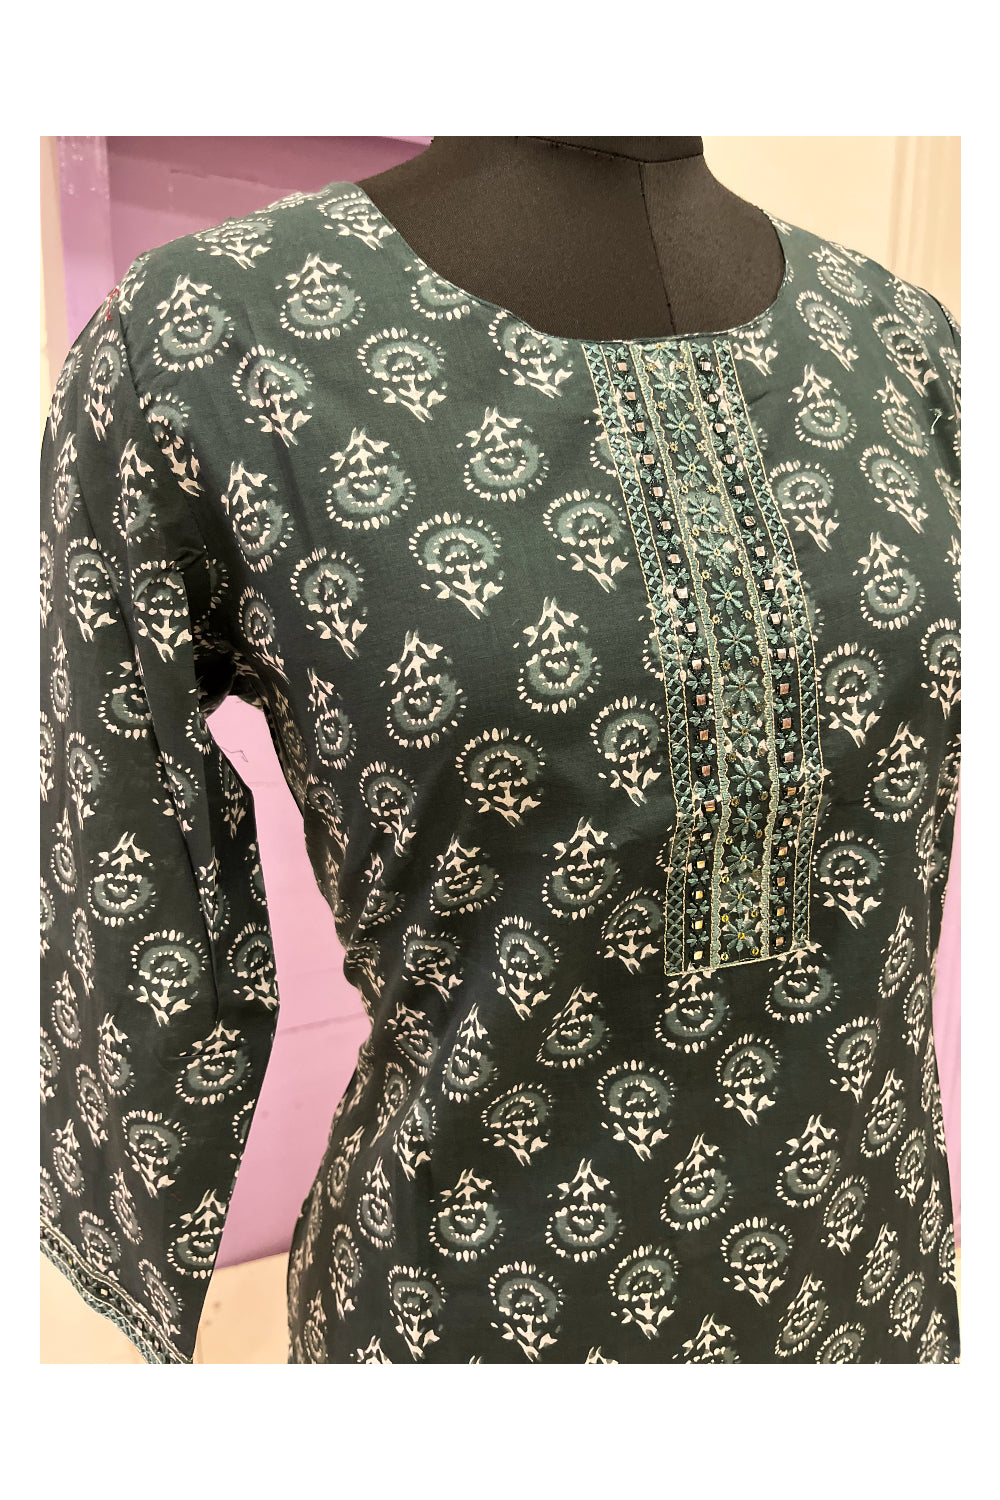 Southloom Stitched Cotton Salwar Set in Dark Green and Floral Prints